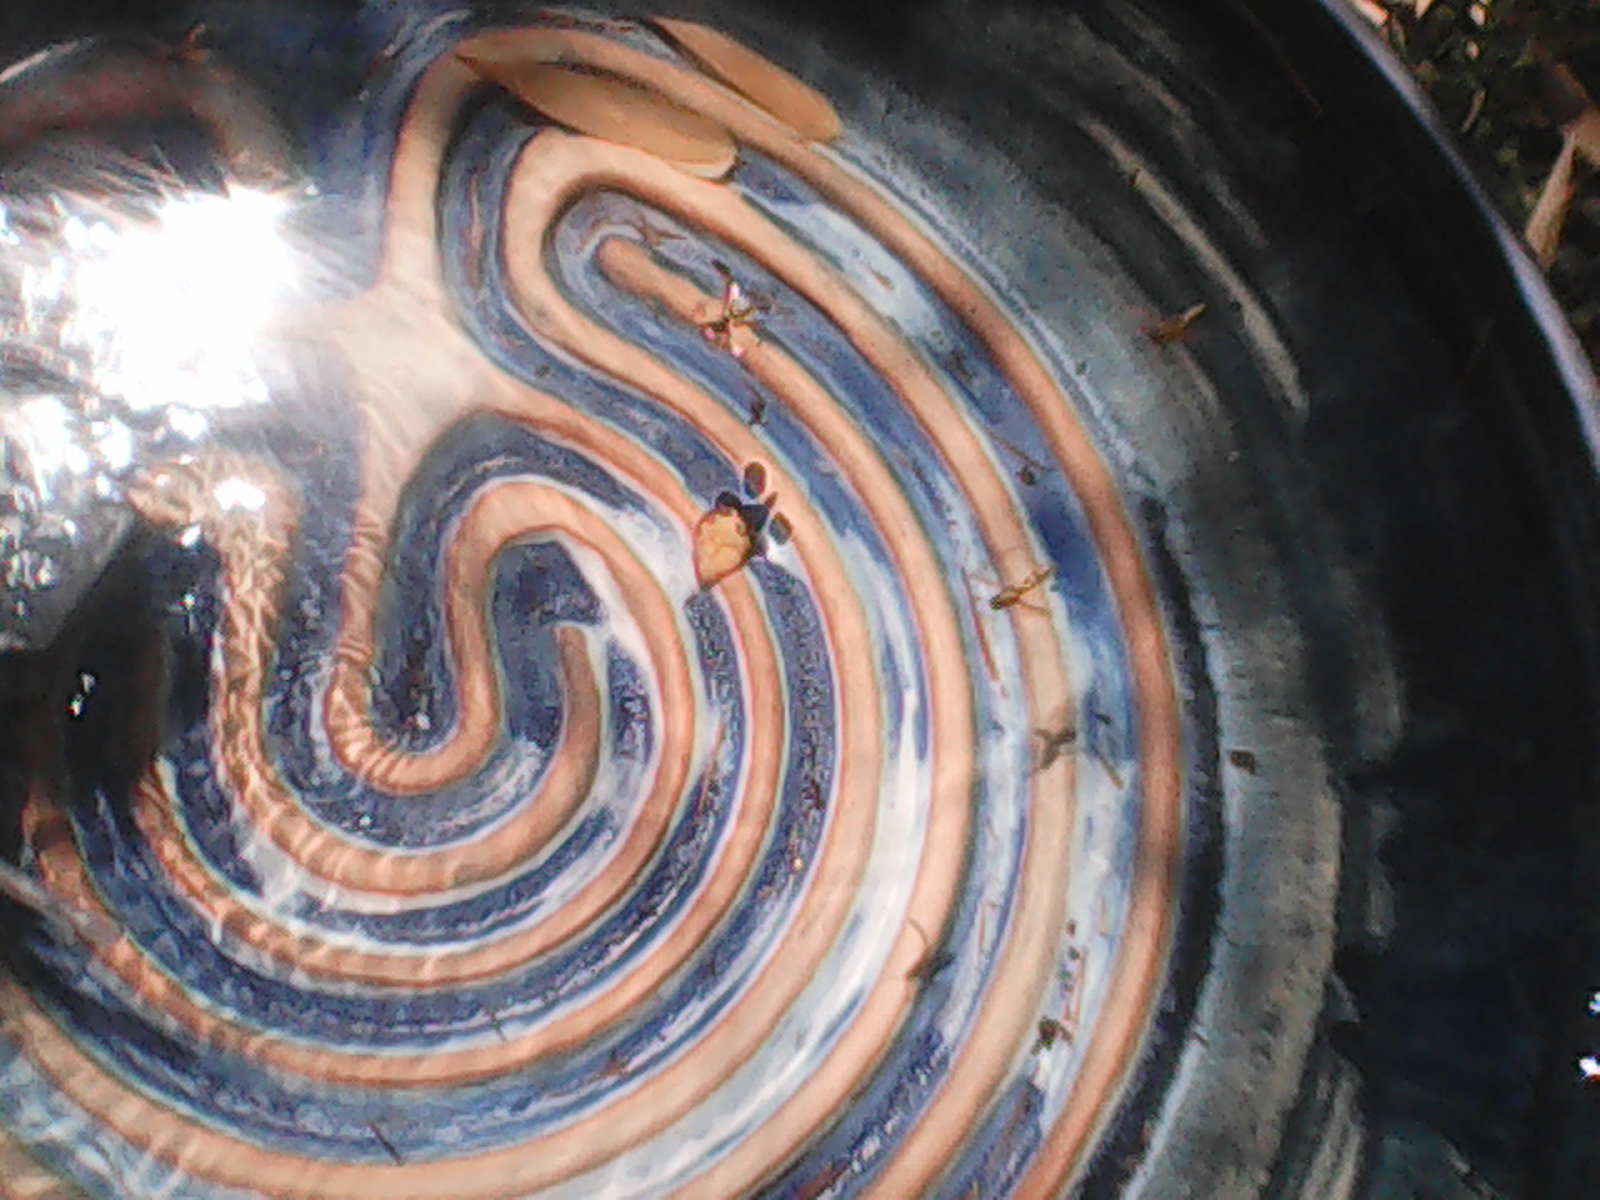 A labyrinthine structure in a clay pot, filled with water.